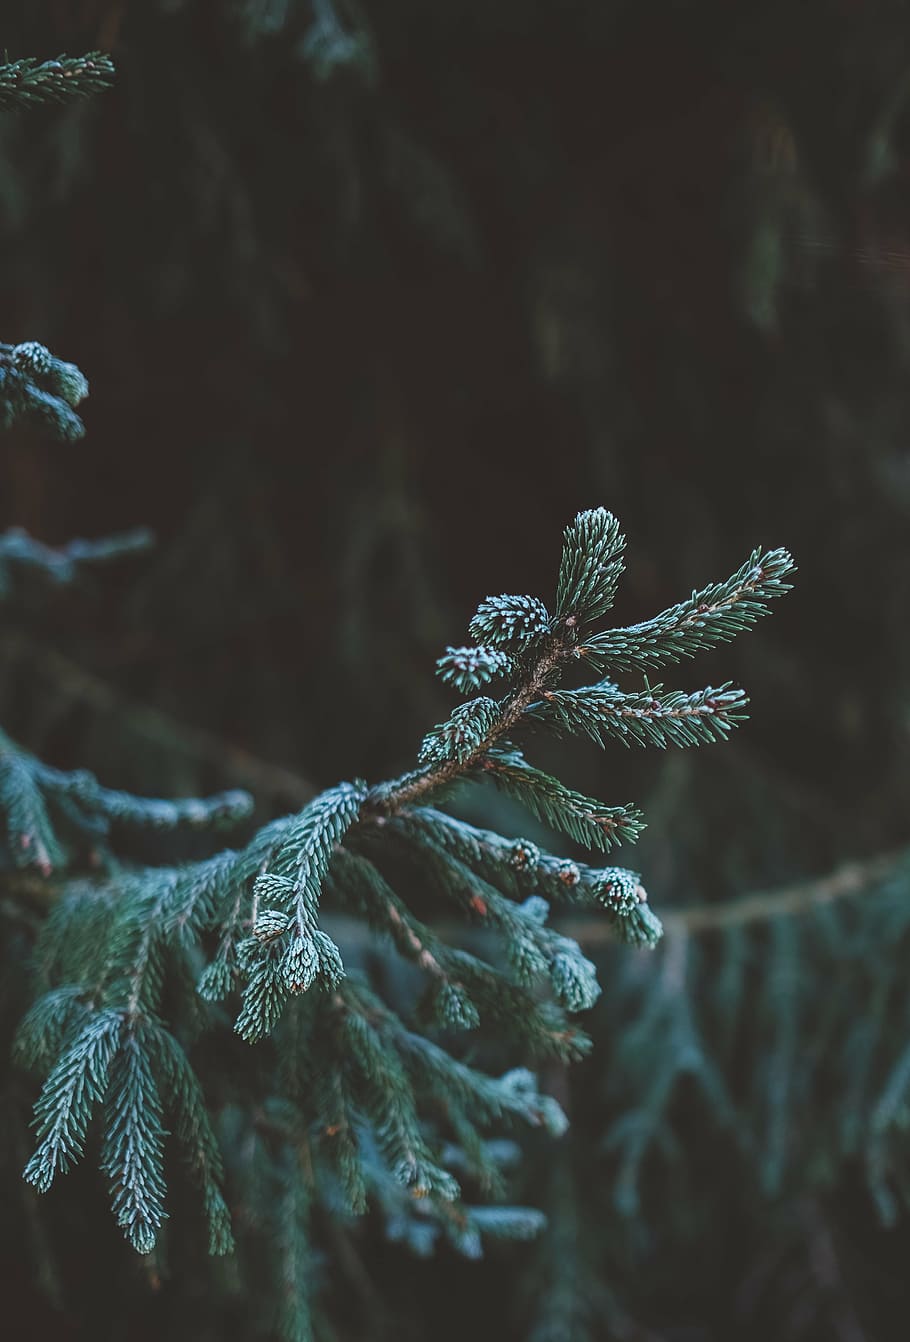 green leaves, plants, tree, pine, forest, nature, green, black, winter, snow